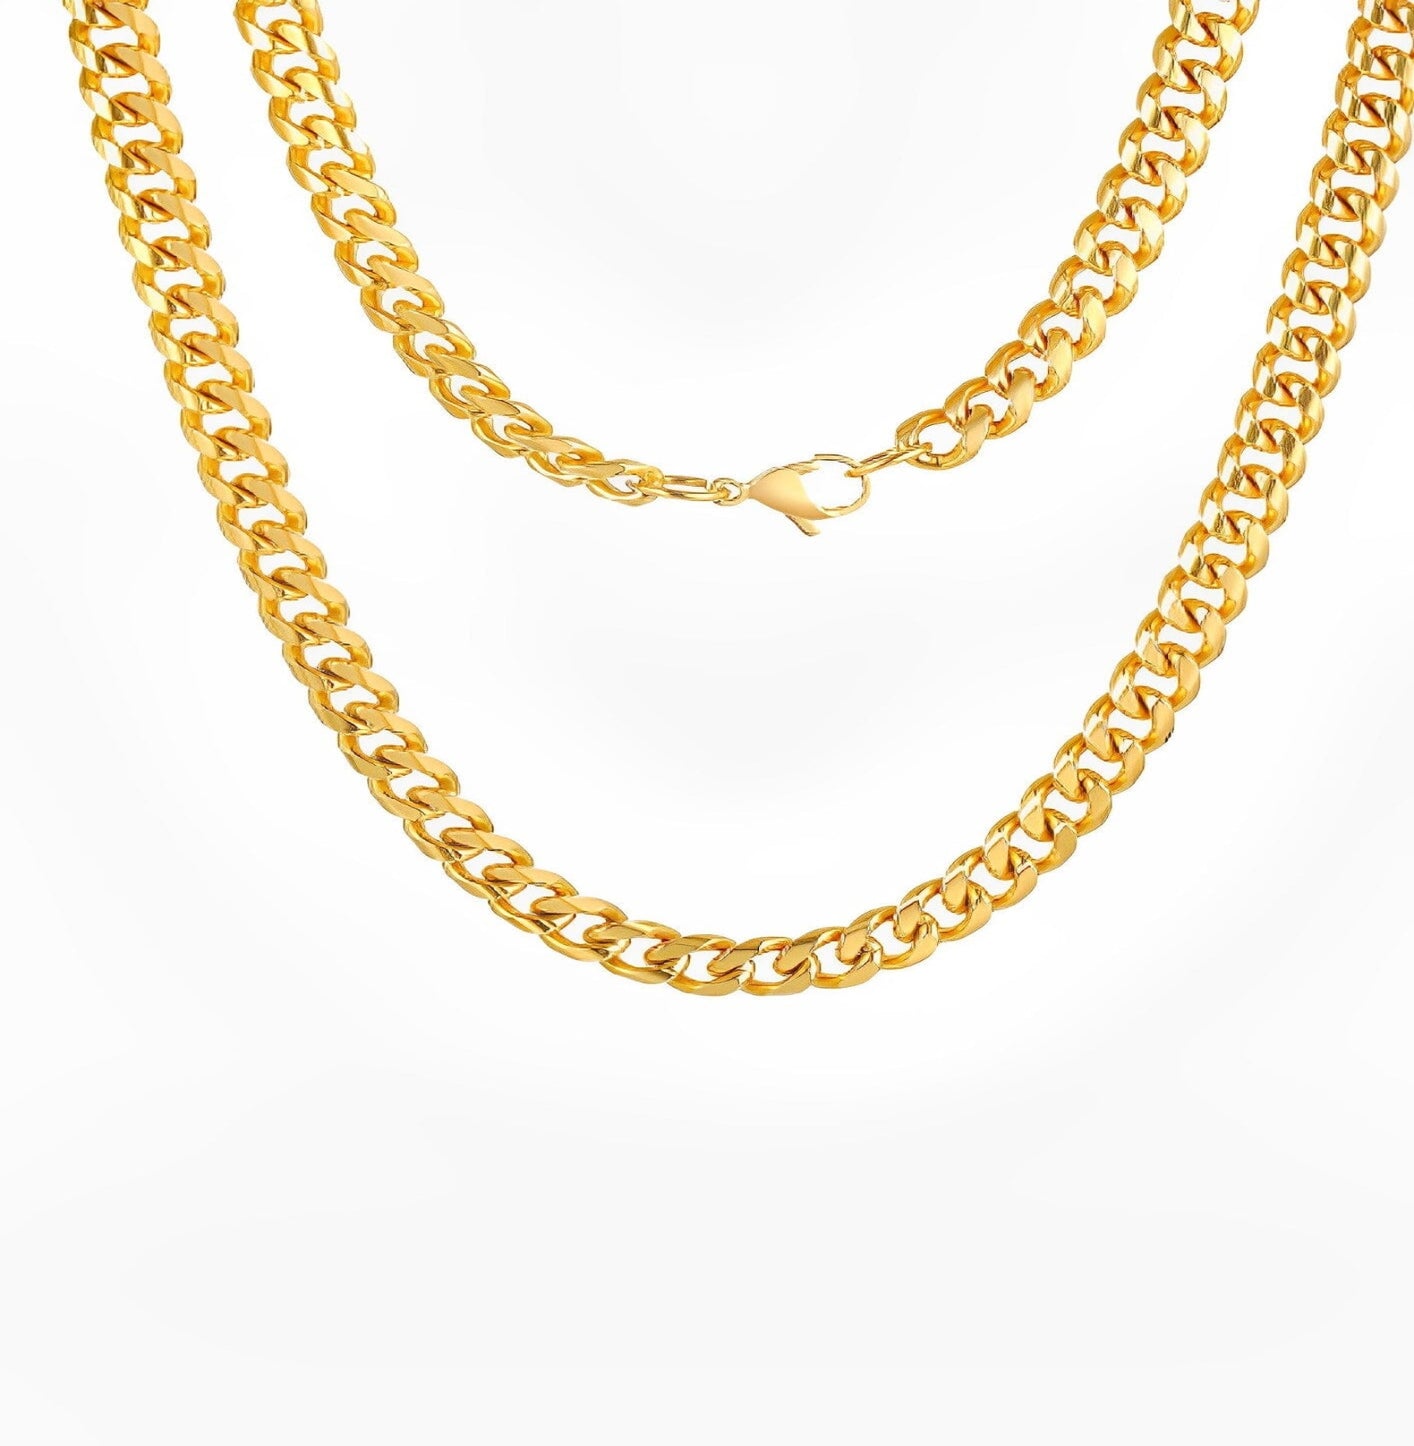 CUBAN NECKLACE neck Yubama Jewelry Online Store - The Elegant Designs of Gold and Silver ! 